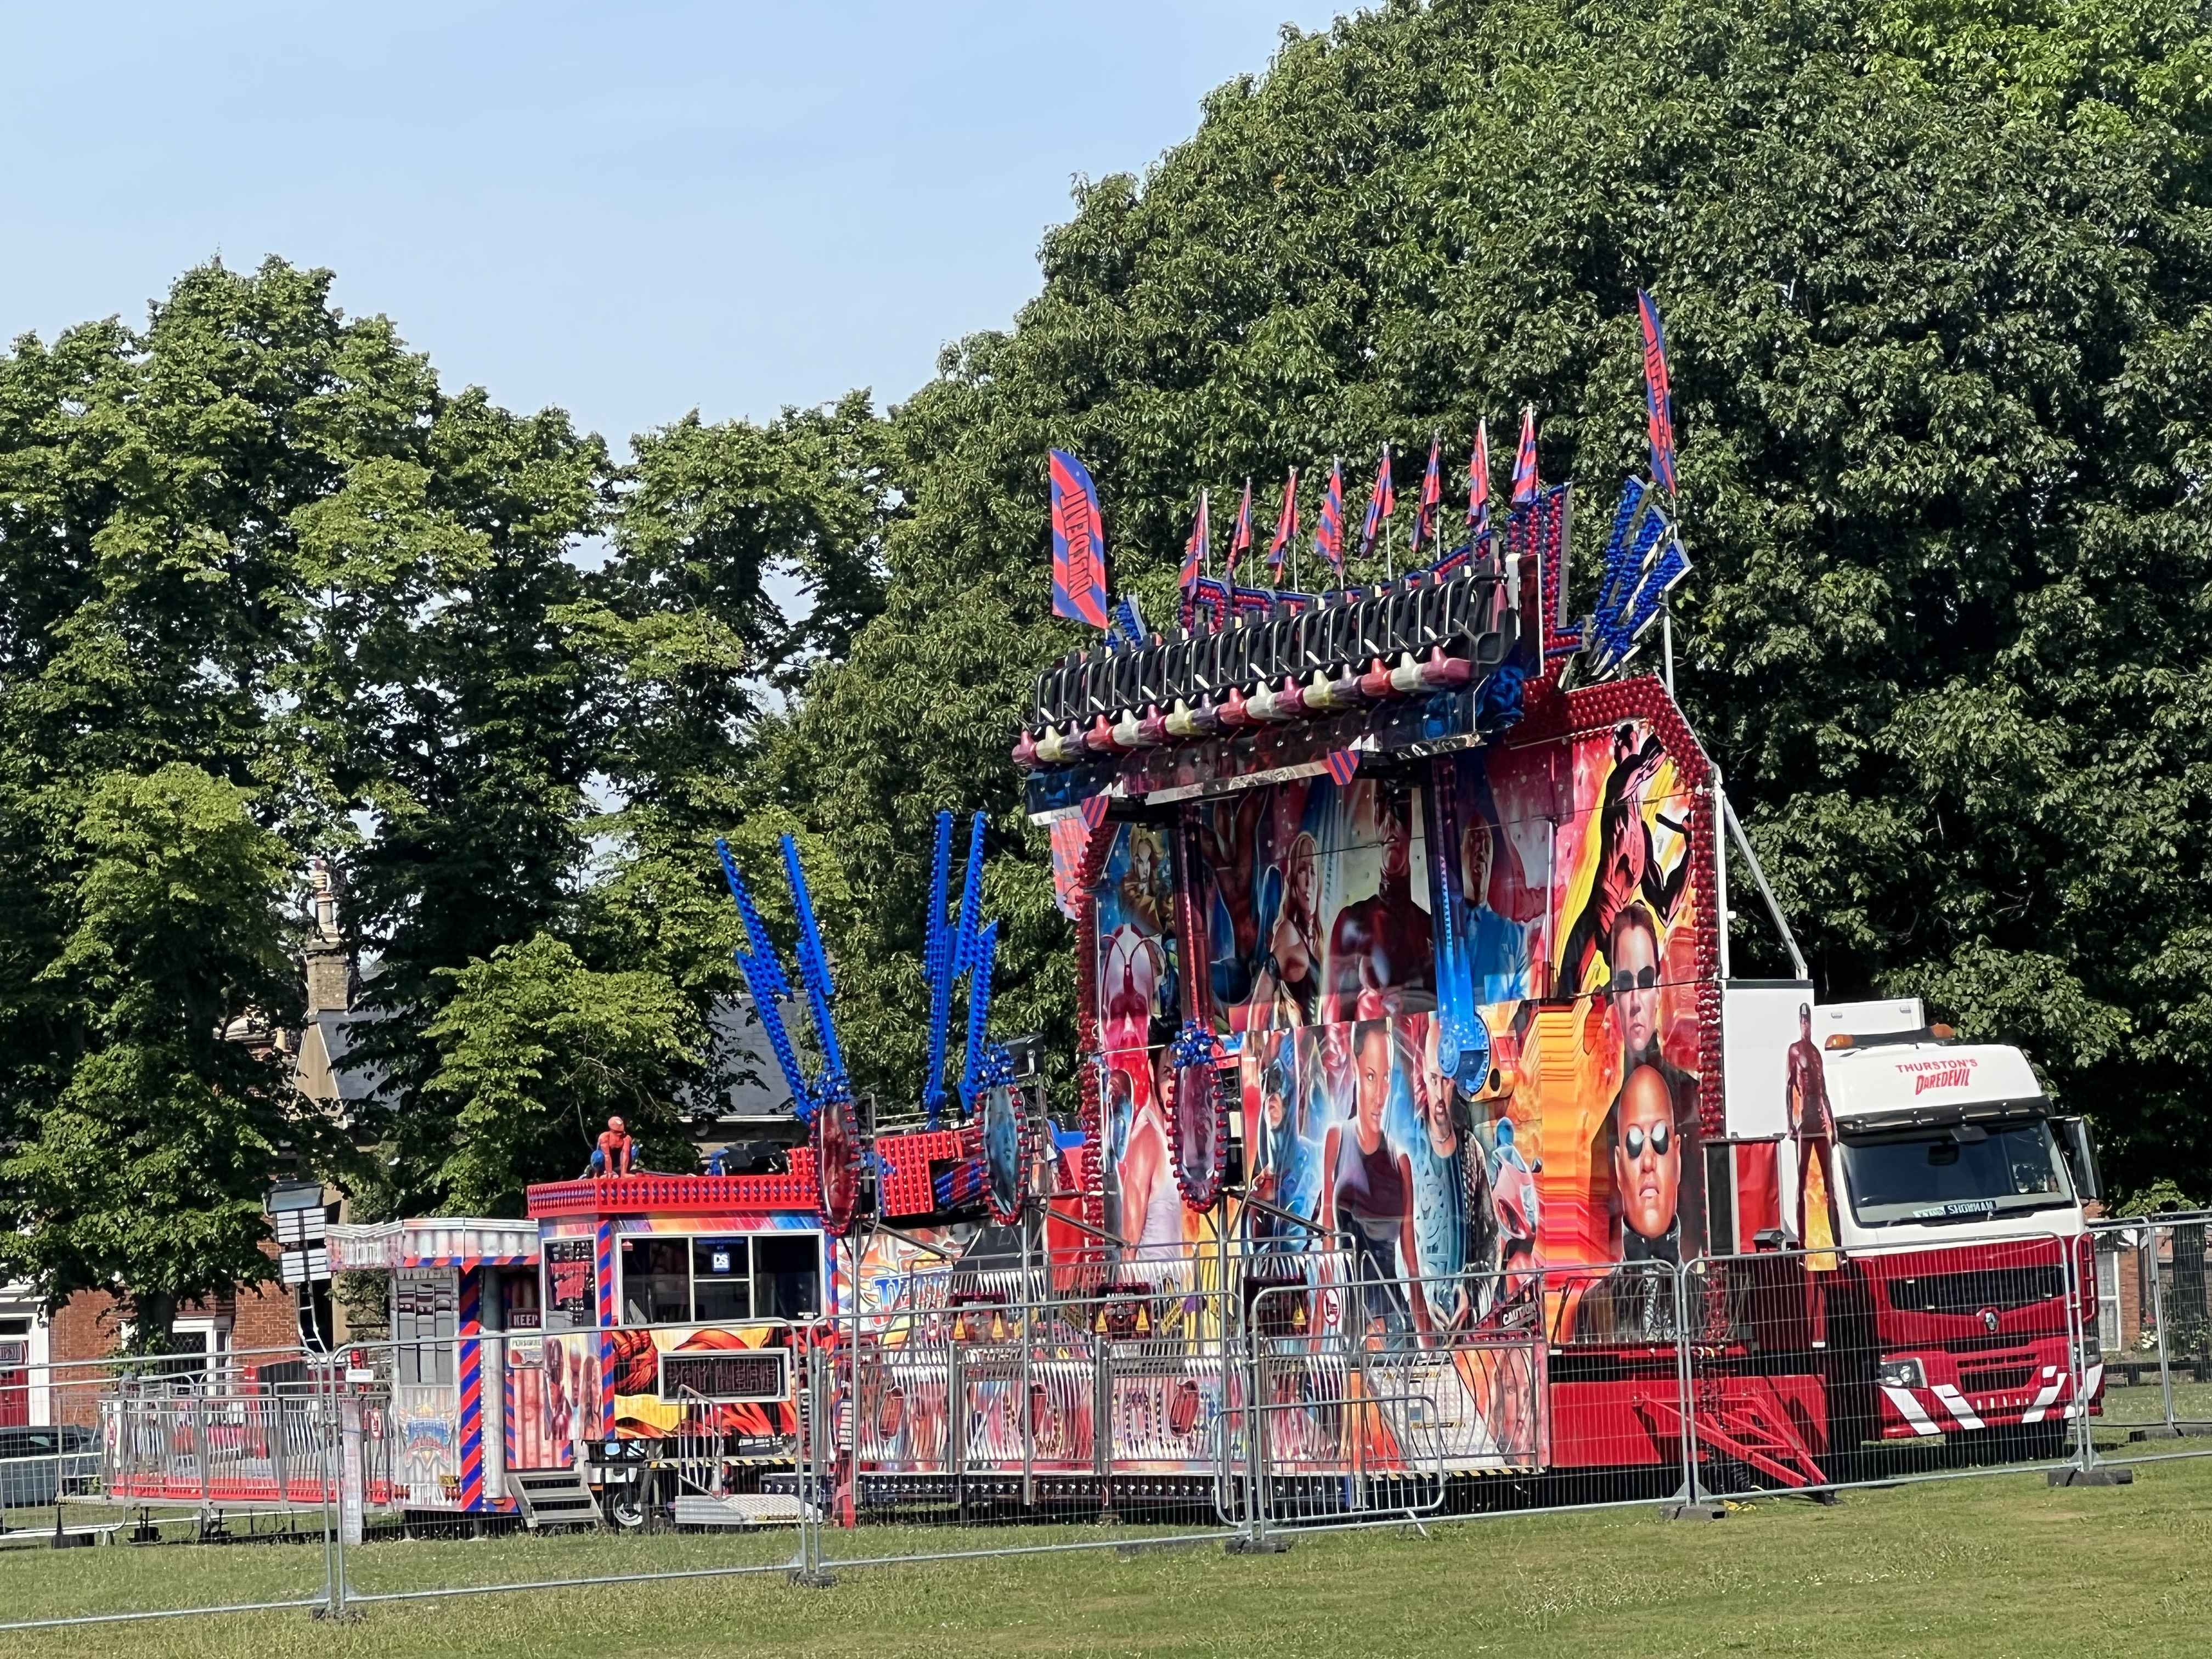 As you can see from our Hitchin Nub News pictures taken on the morning of Thursday (June 16, 2022) the fair returns to Hitchin this weekend